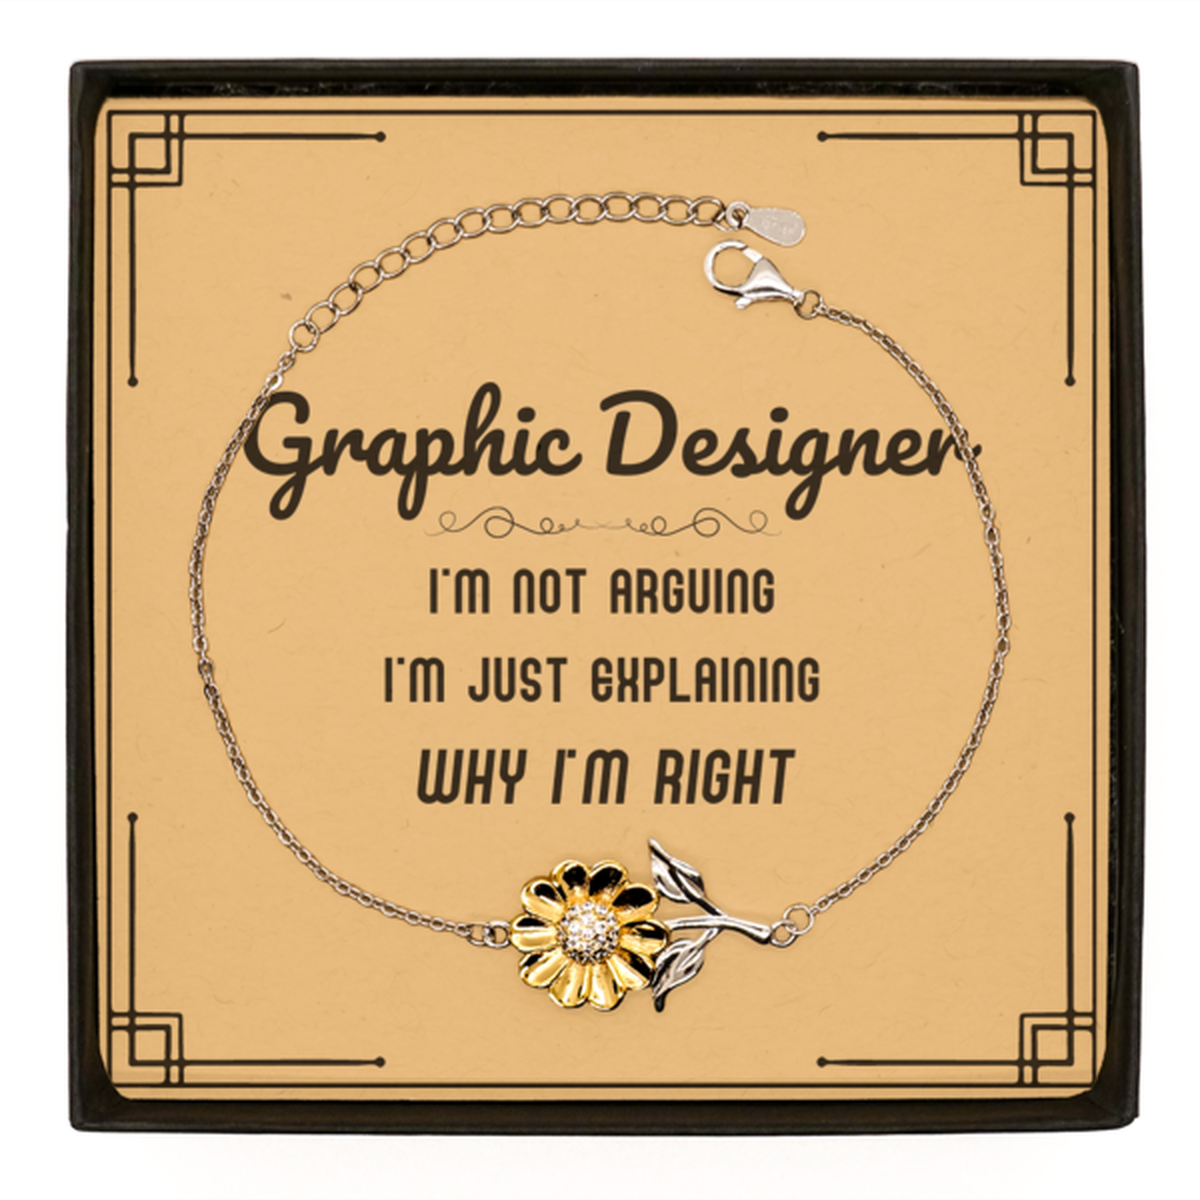 Graphic Designer I'm not Arguing. I'm Just Explaining Why I'm RIGHT Sunflower Bracelet, Funny Saying Quote Graphic Designer Gifts For Graphic Designer Message Card Graduation Birthday Christmas Gifts for Men Women Coworker